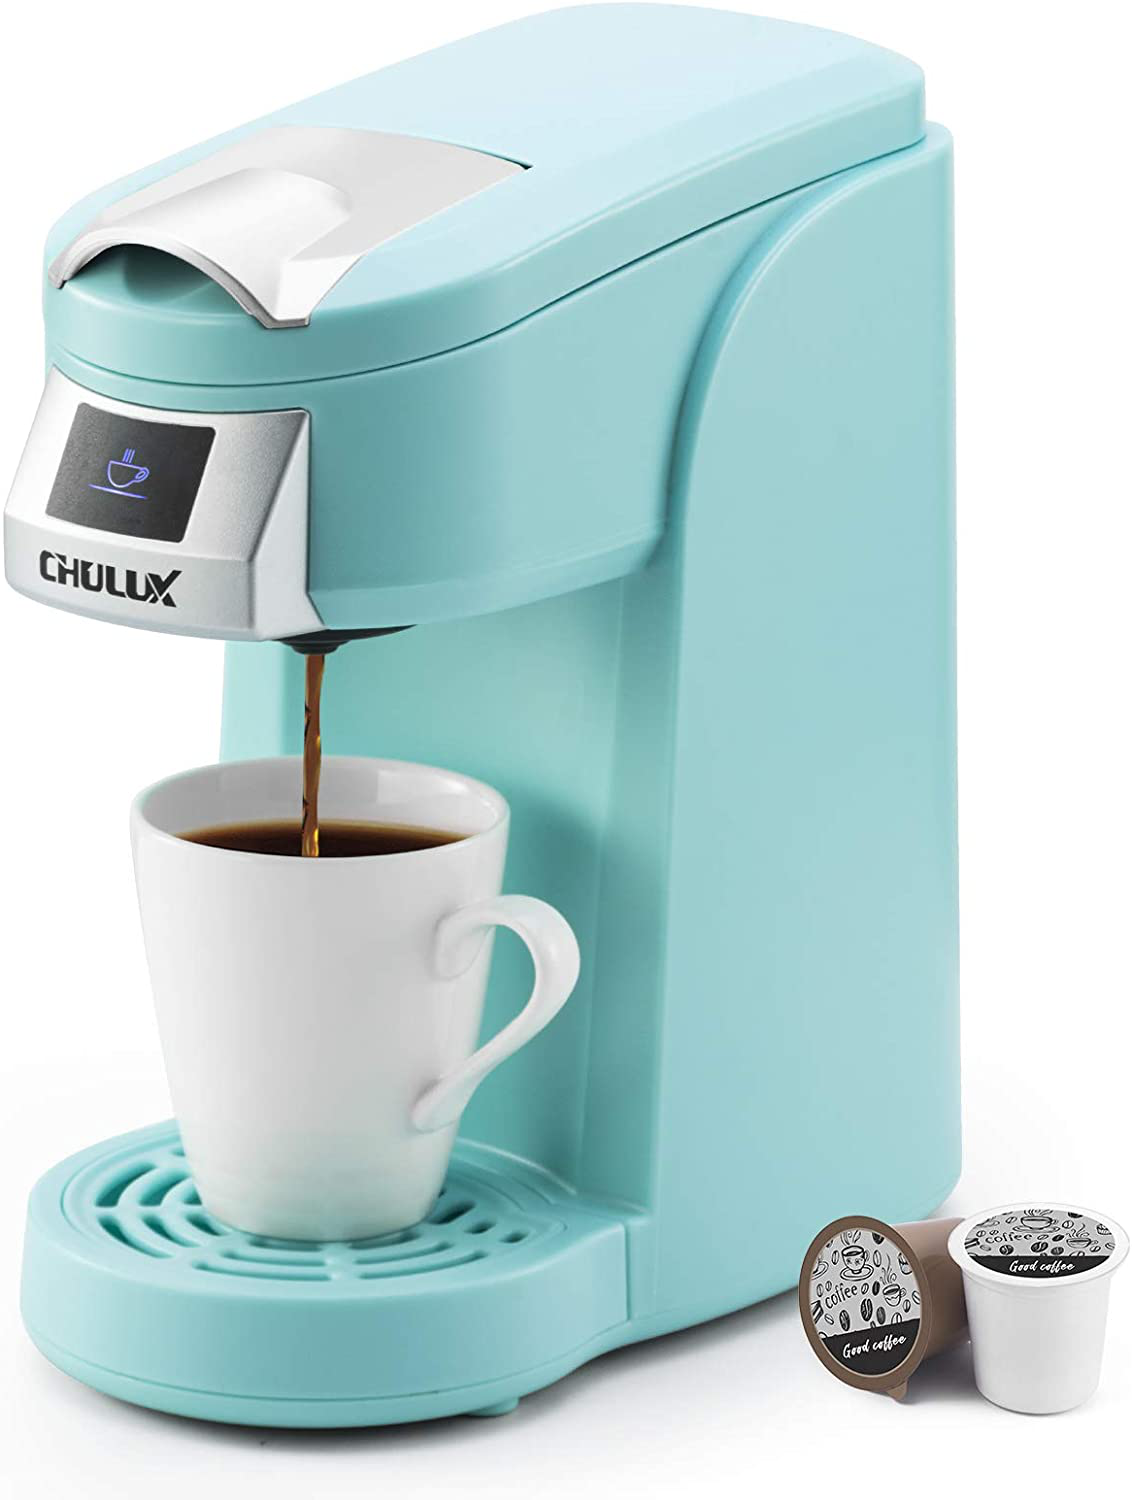 CHULUX Single Cup Coffee Maker Machine,12 Ounce Pod Coffee Brewer,One Touch Function for Brewing Capsule or Ground Coffee,Cyan